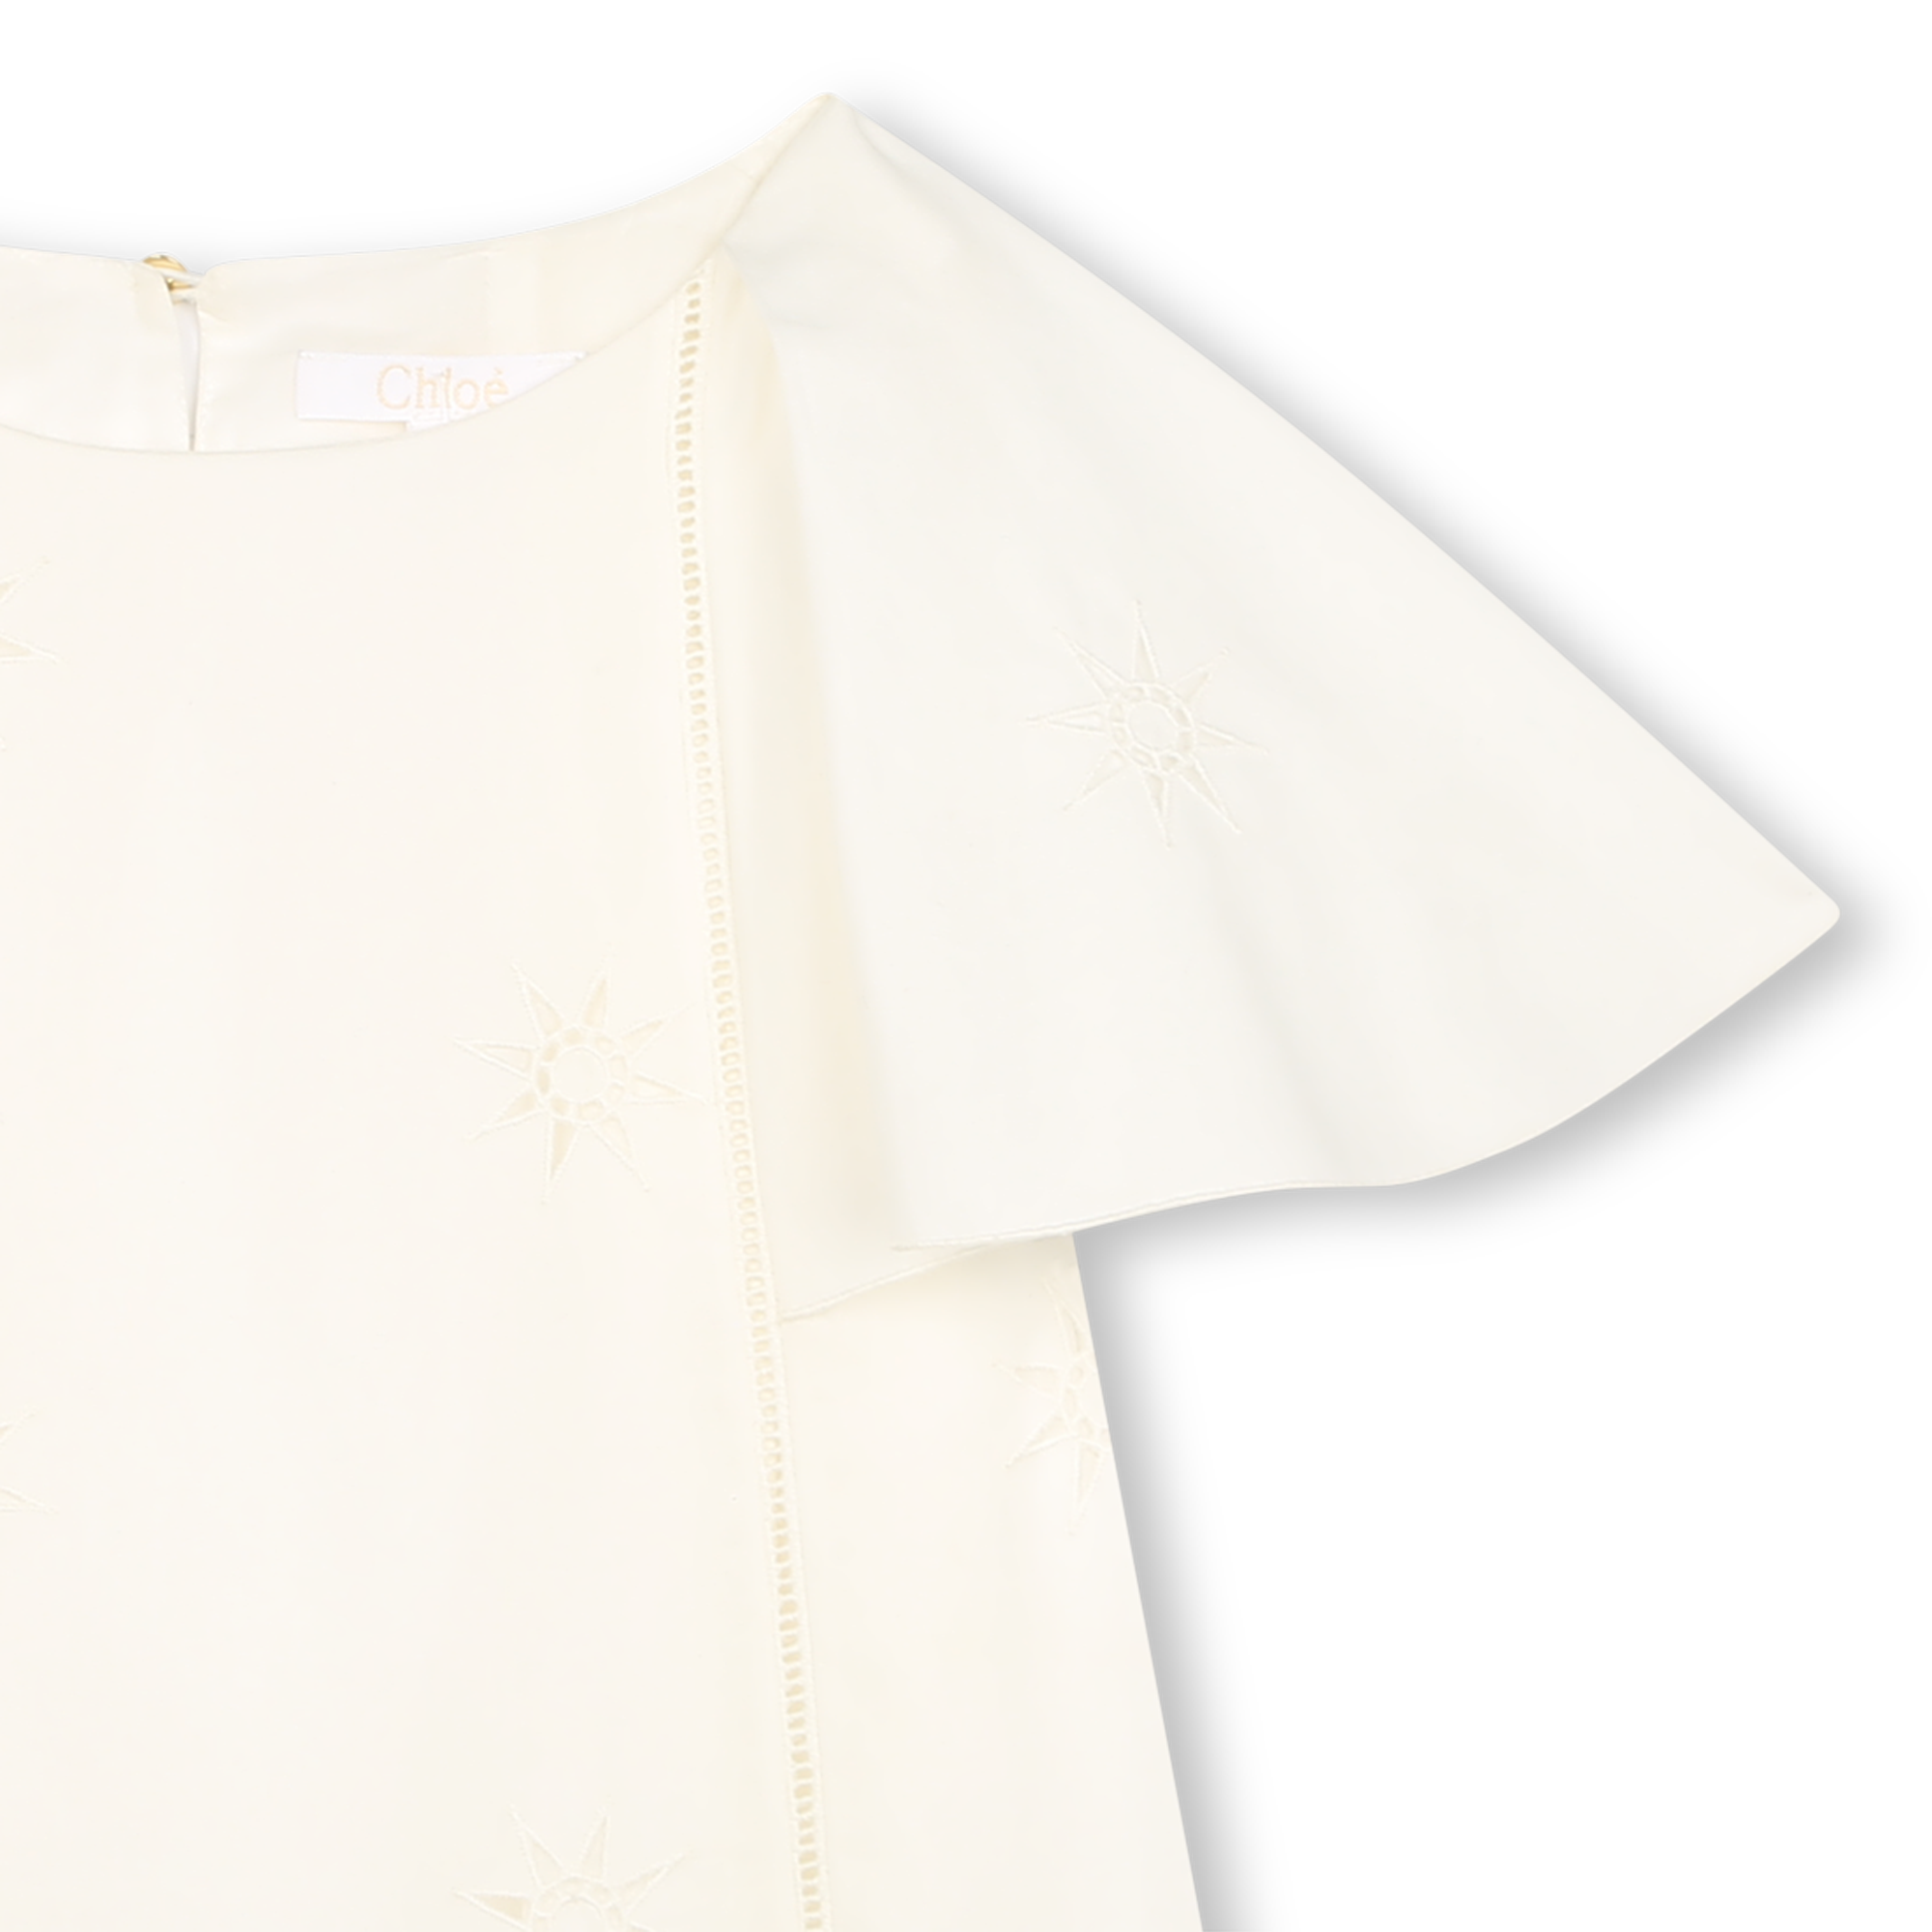 Chloé Kids broderie-anglaise organic cotton blouse - White